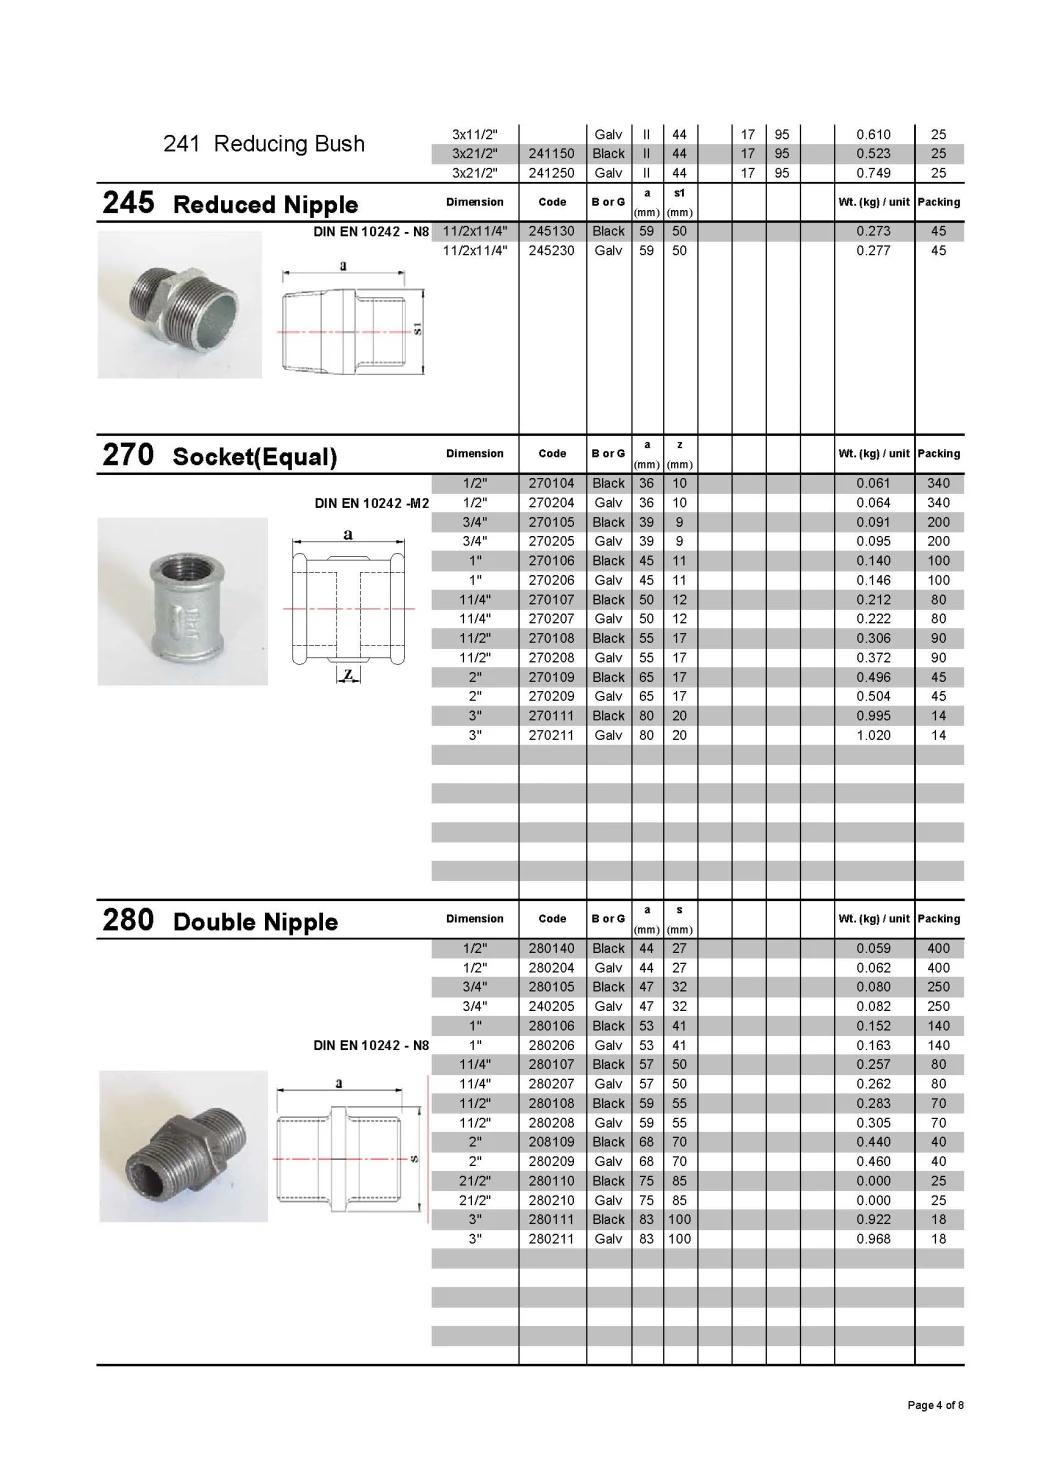 Malleable Iron Pipe Fittings for Gas&Oil Industry